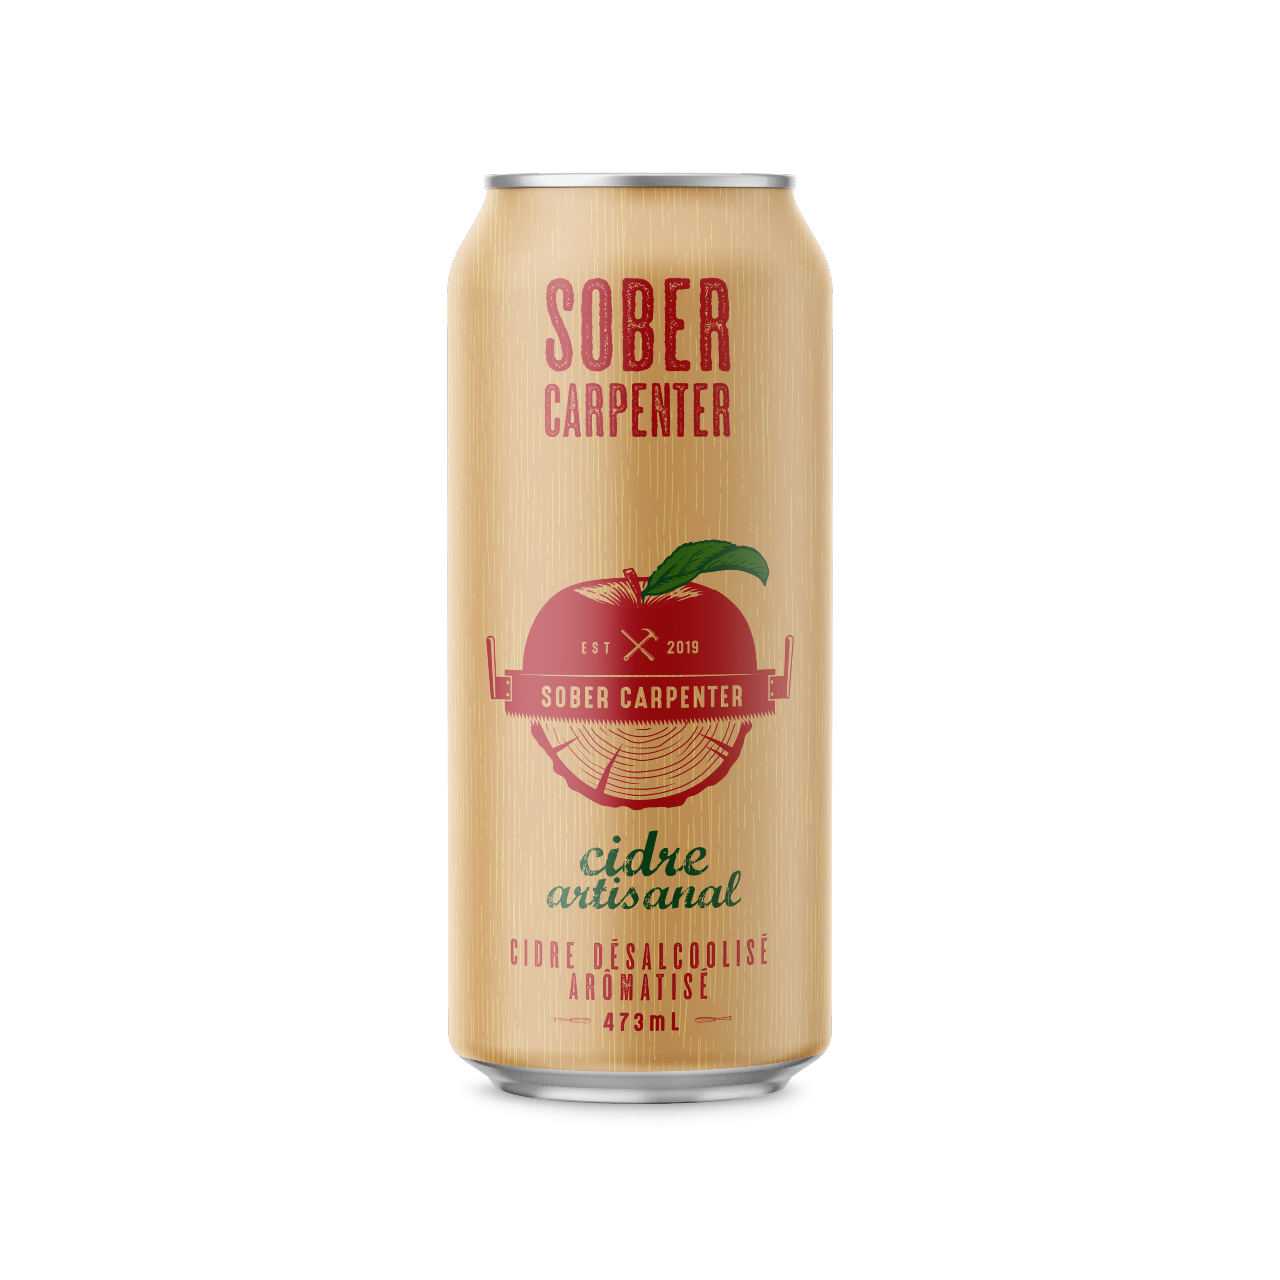 A tall and light brown can with an illustrated image of a red apple.